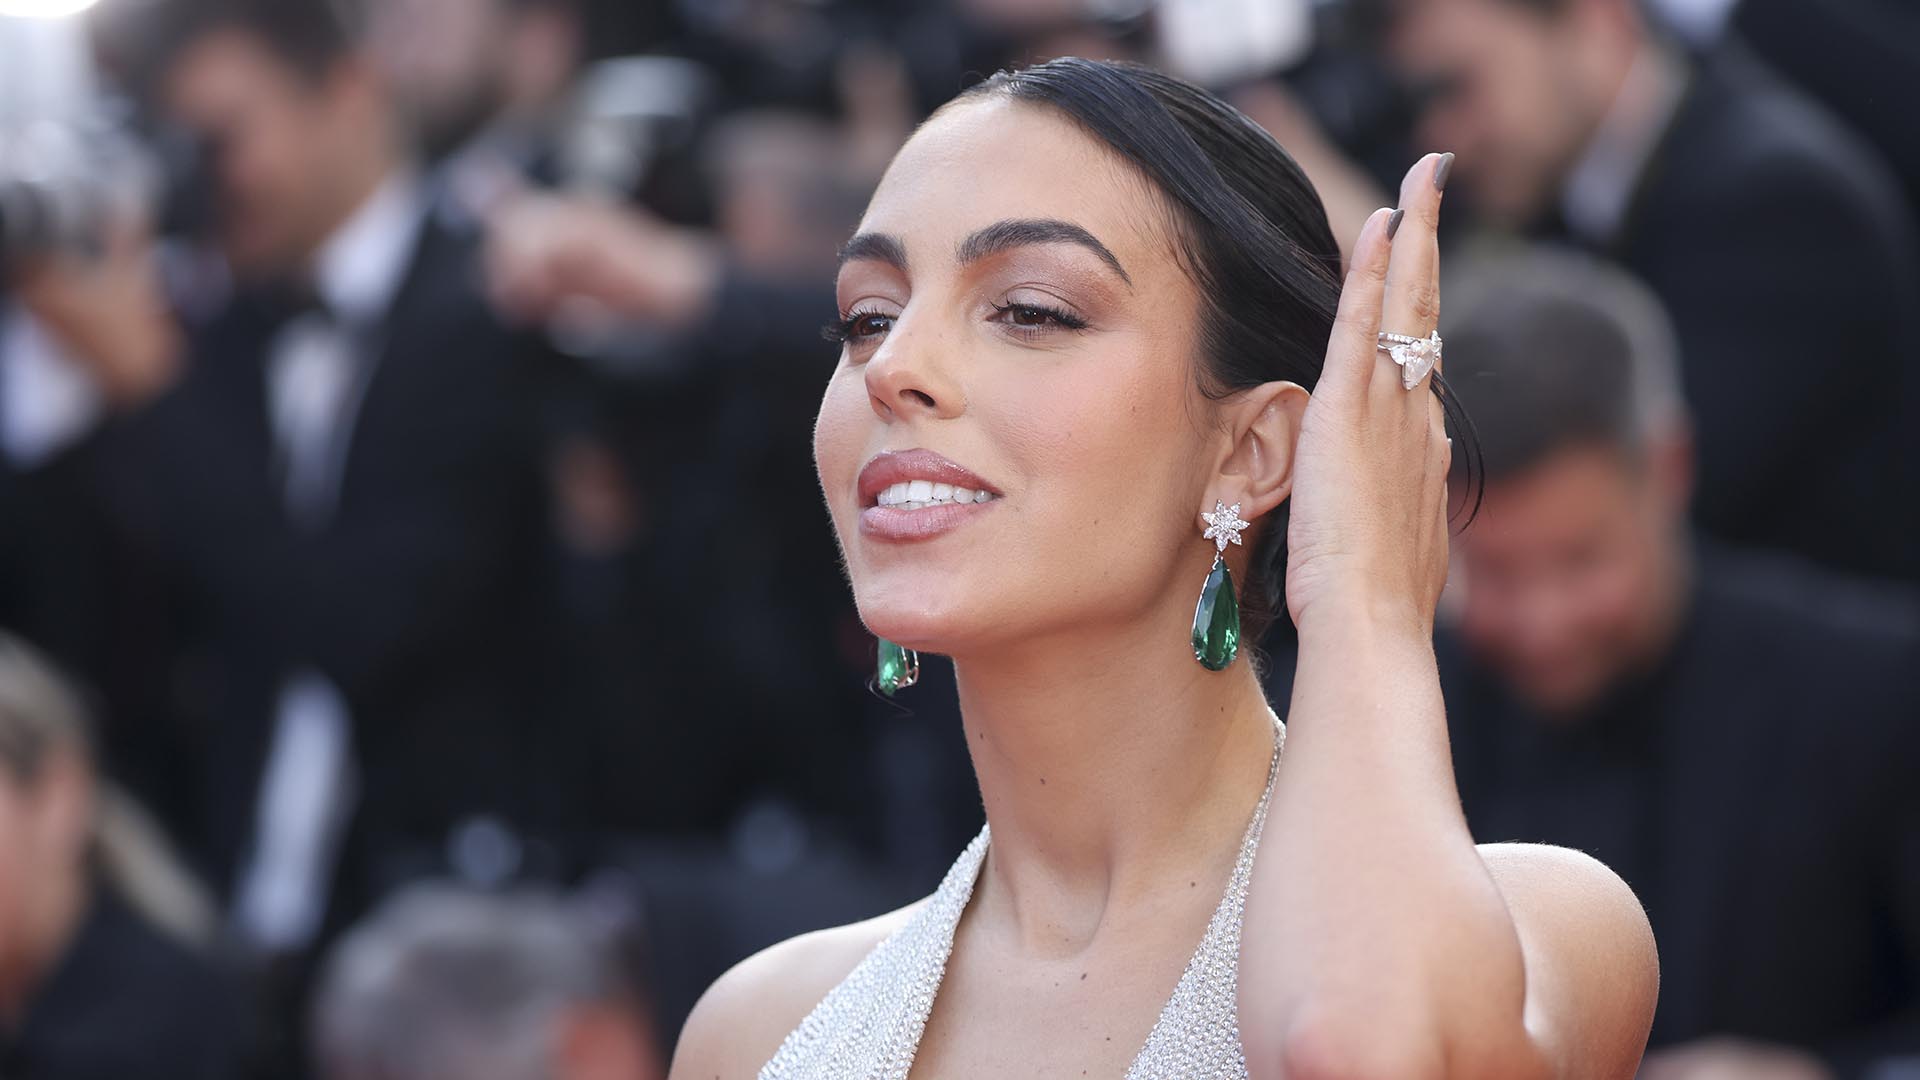 Georgina Rodriguez at premiere film "Elvis" during the 75th annual Cannes film festival on May 25, 2022 in Cannes, France.